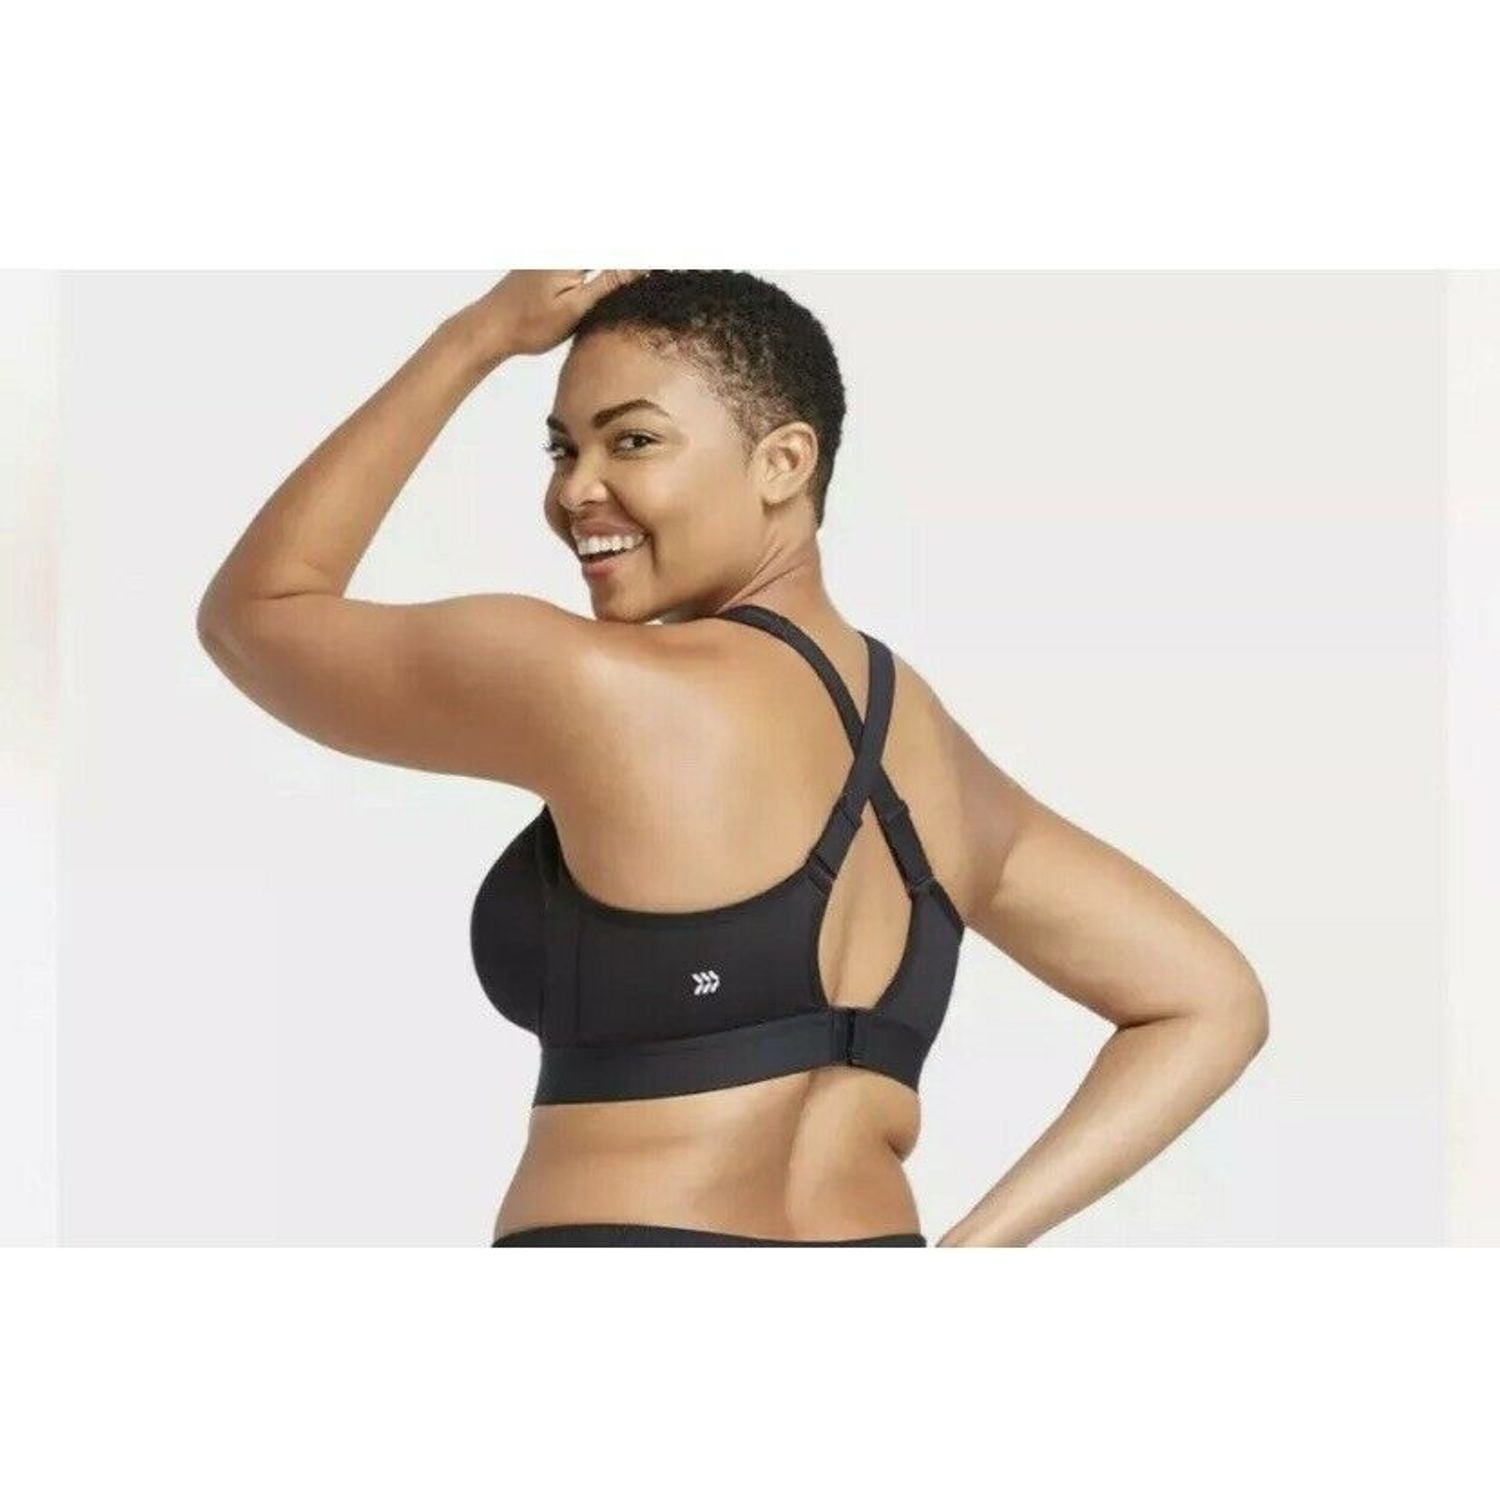 all in motion 100% Polyester Black Sports Bra Size XL (38D) - 41